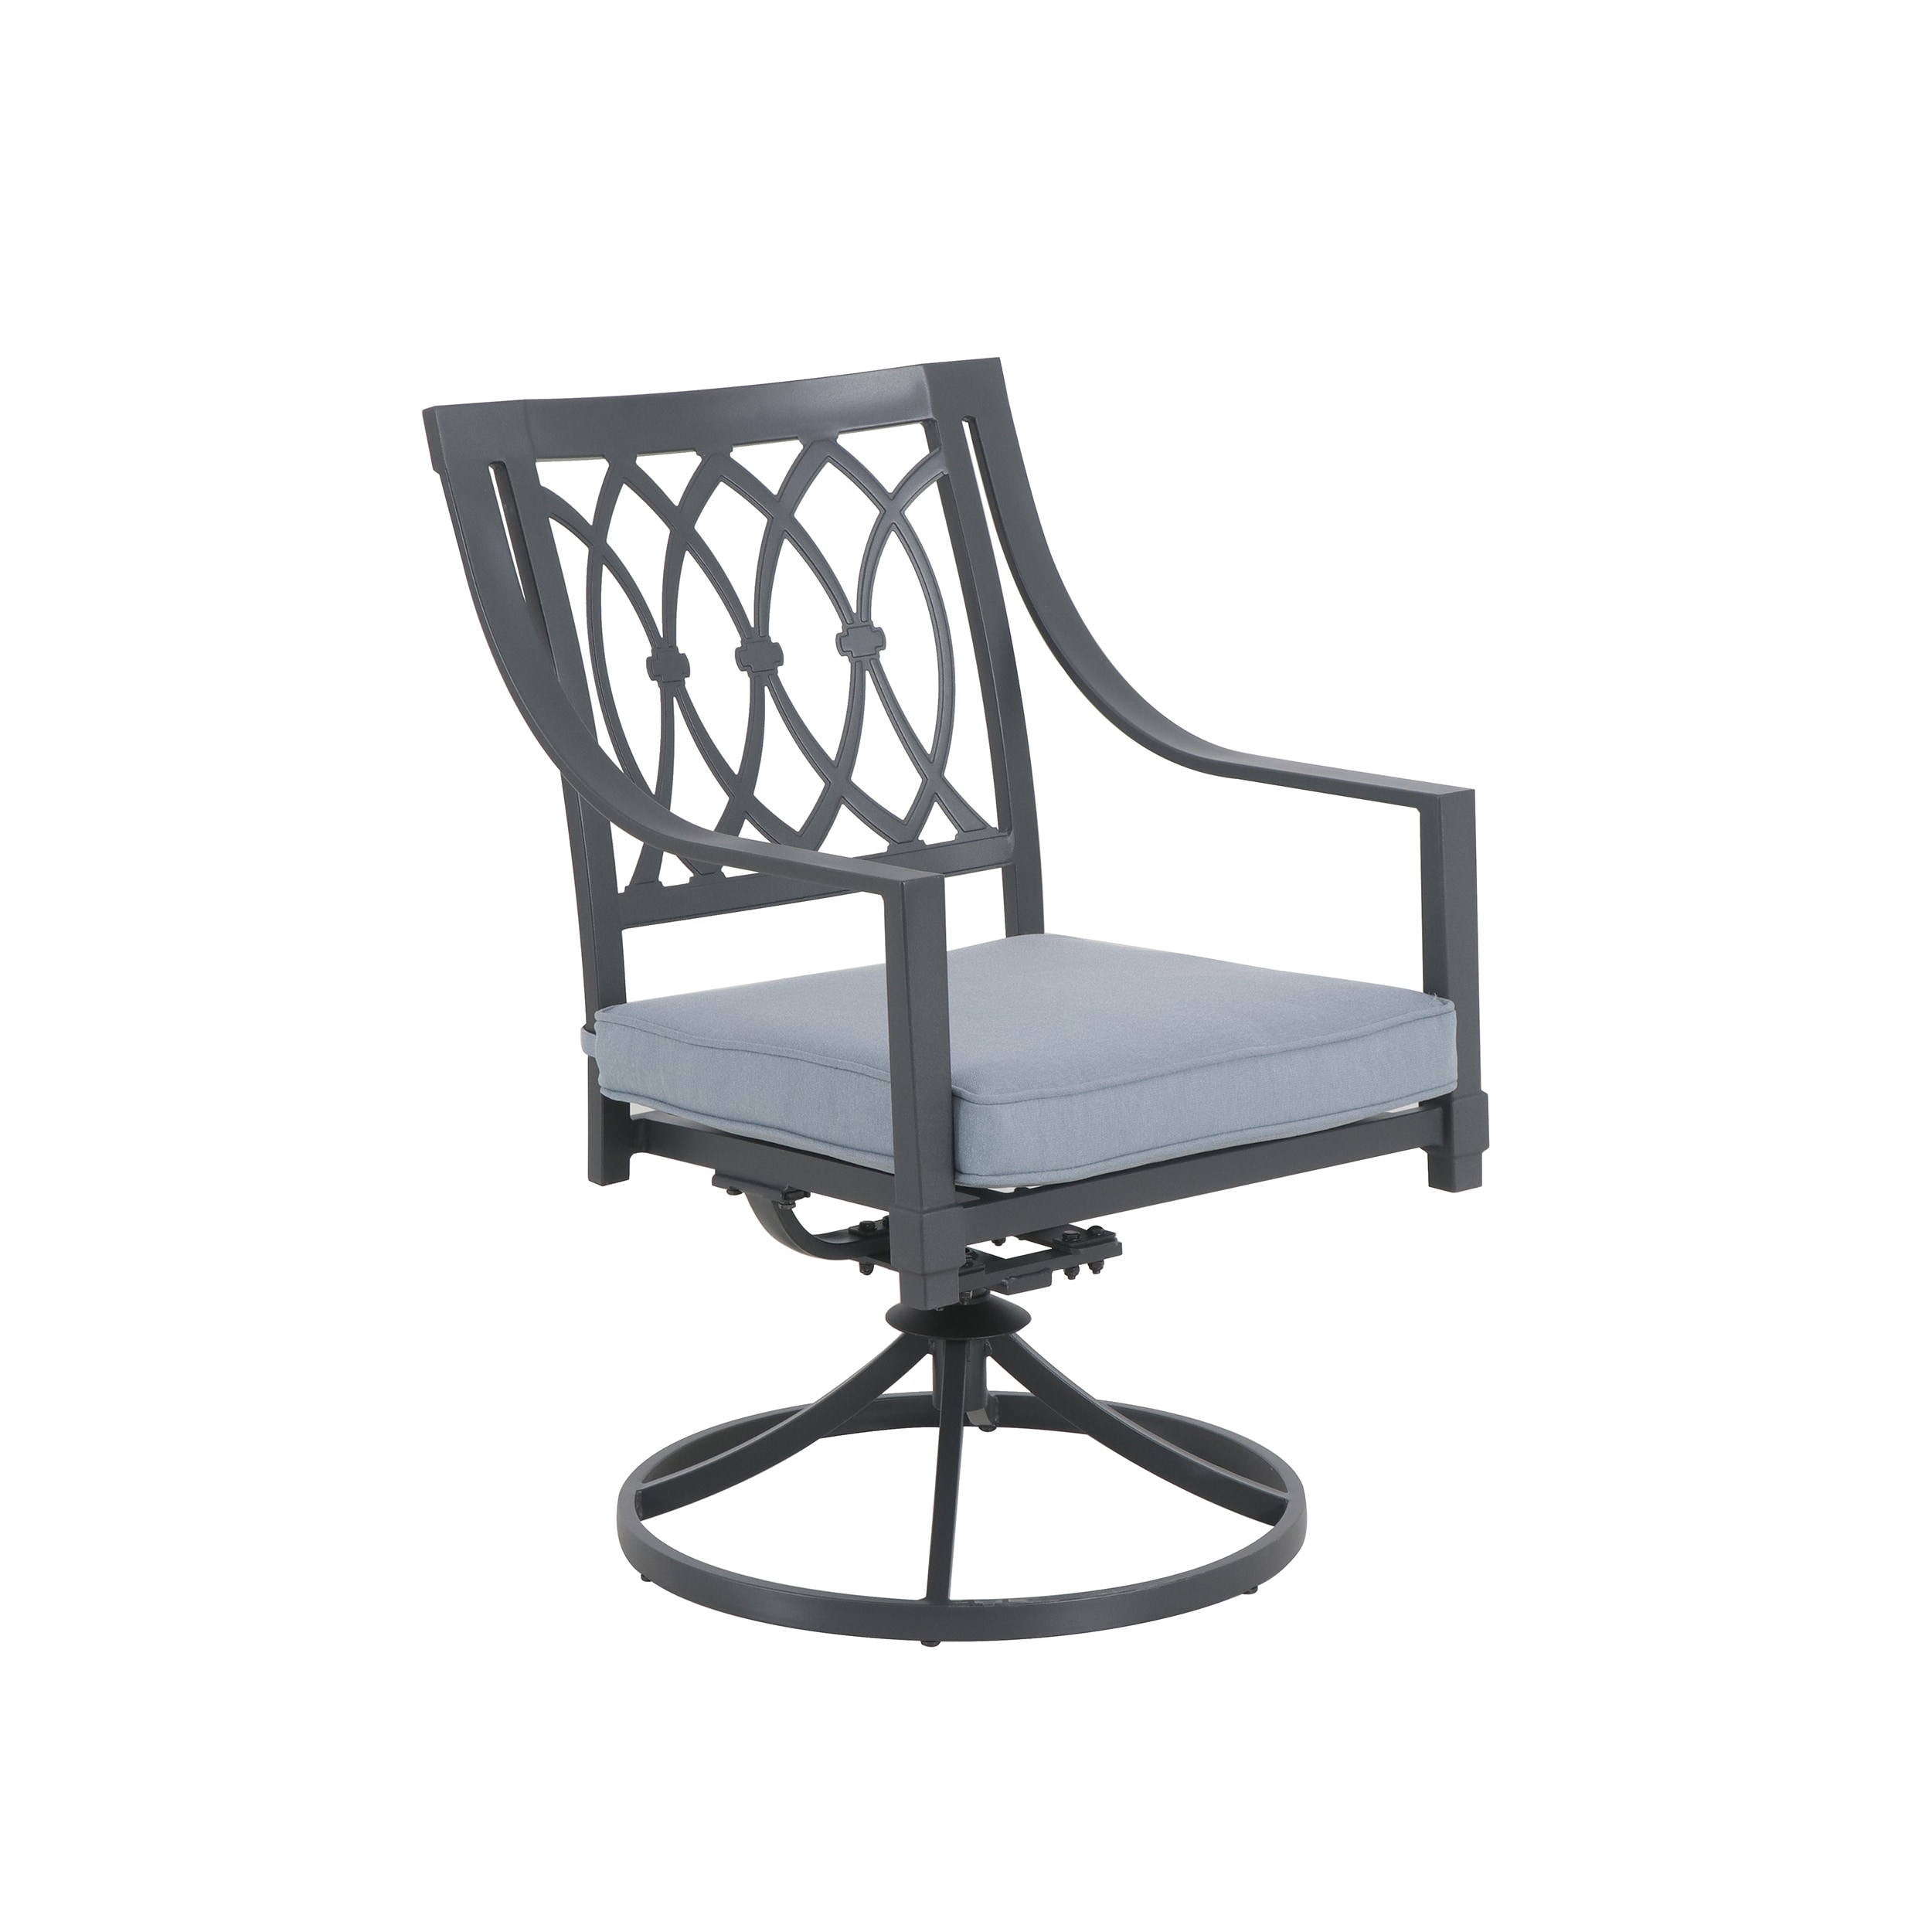 Grey Metal Frame Swivel Dining Chair, Grey Dining Chairs Set Of 4 With Arms